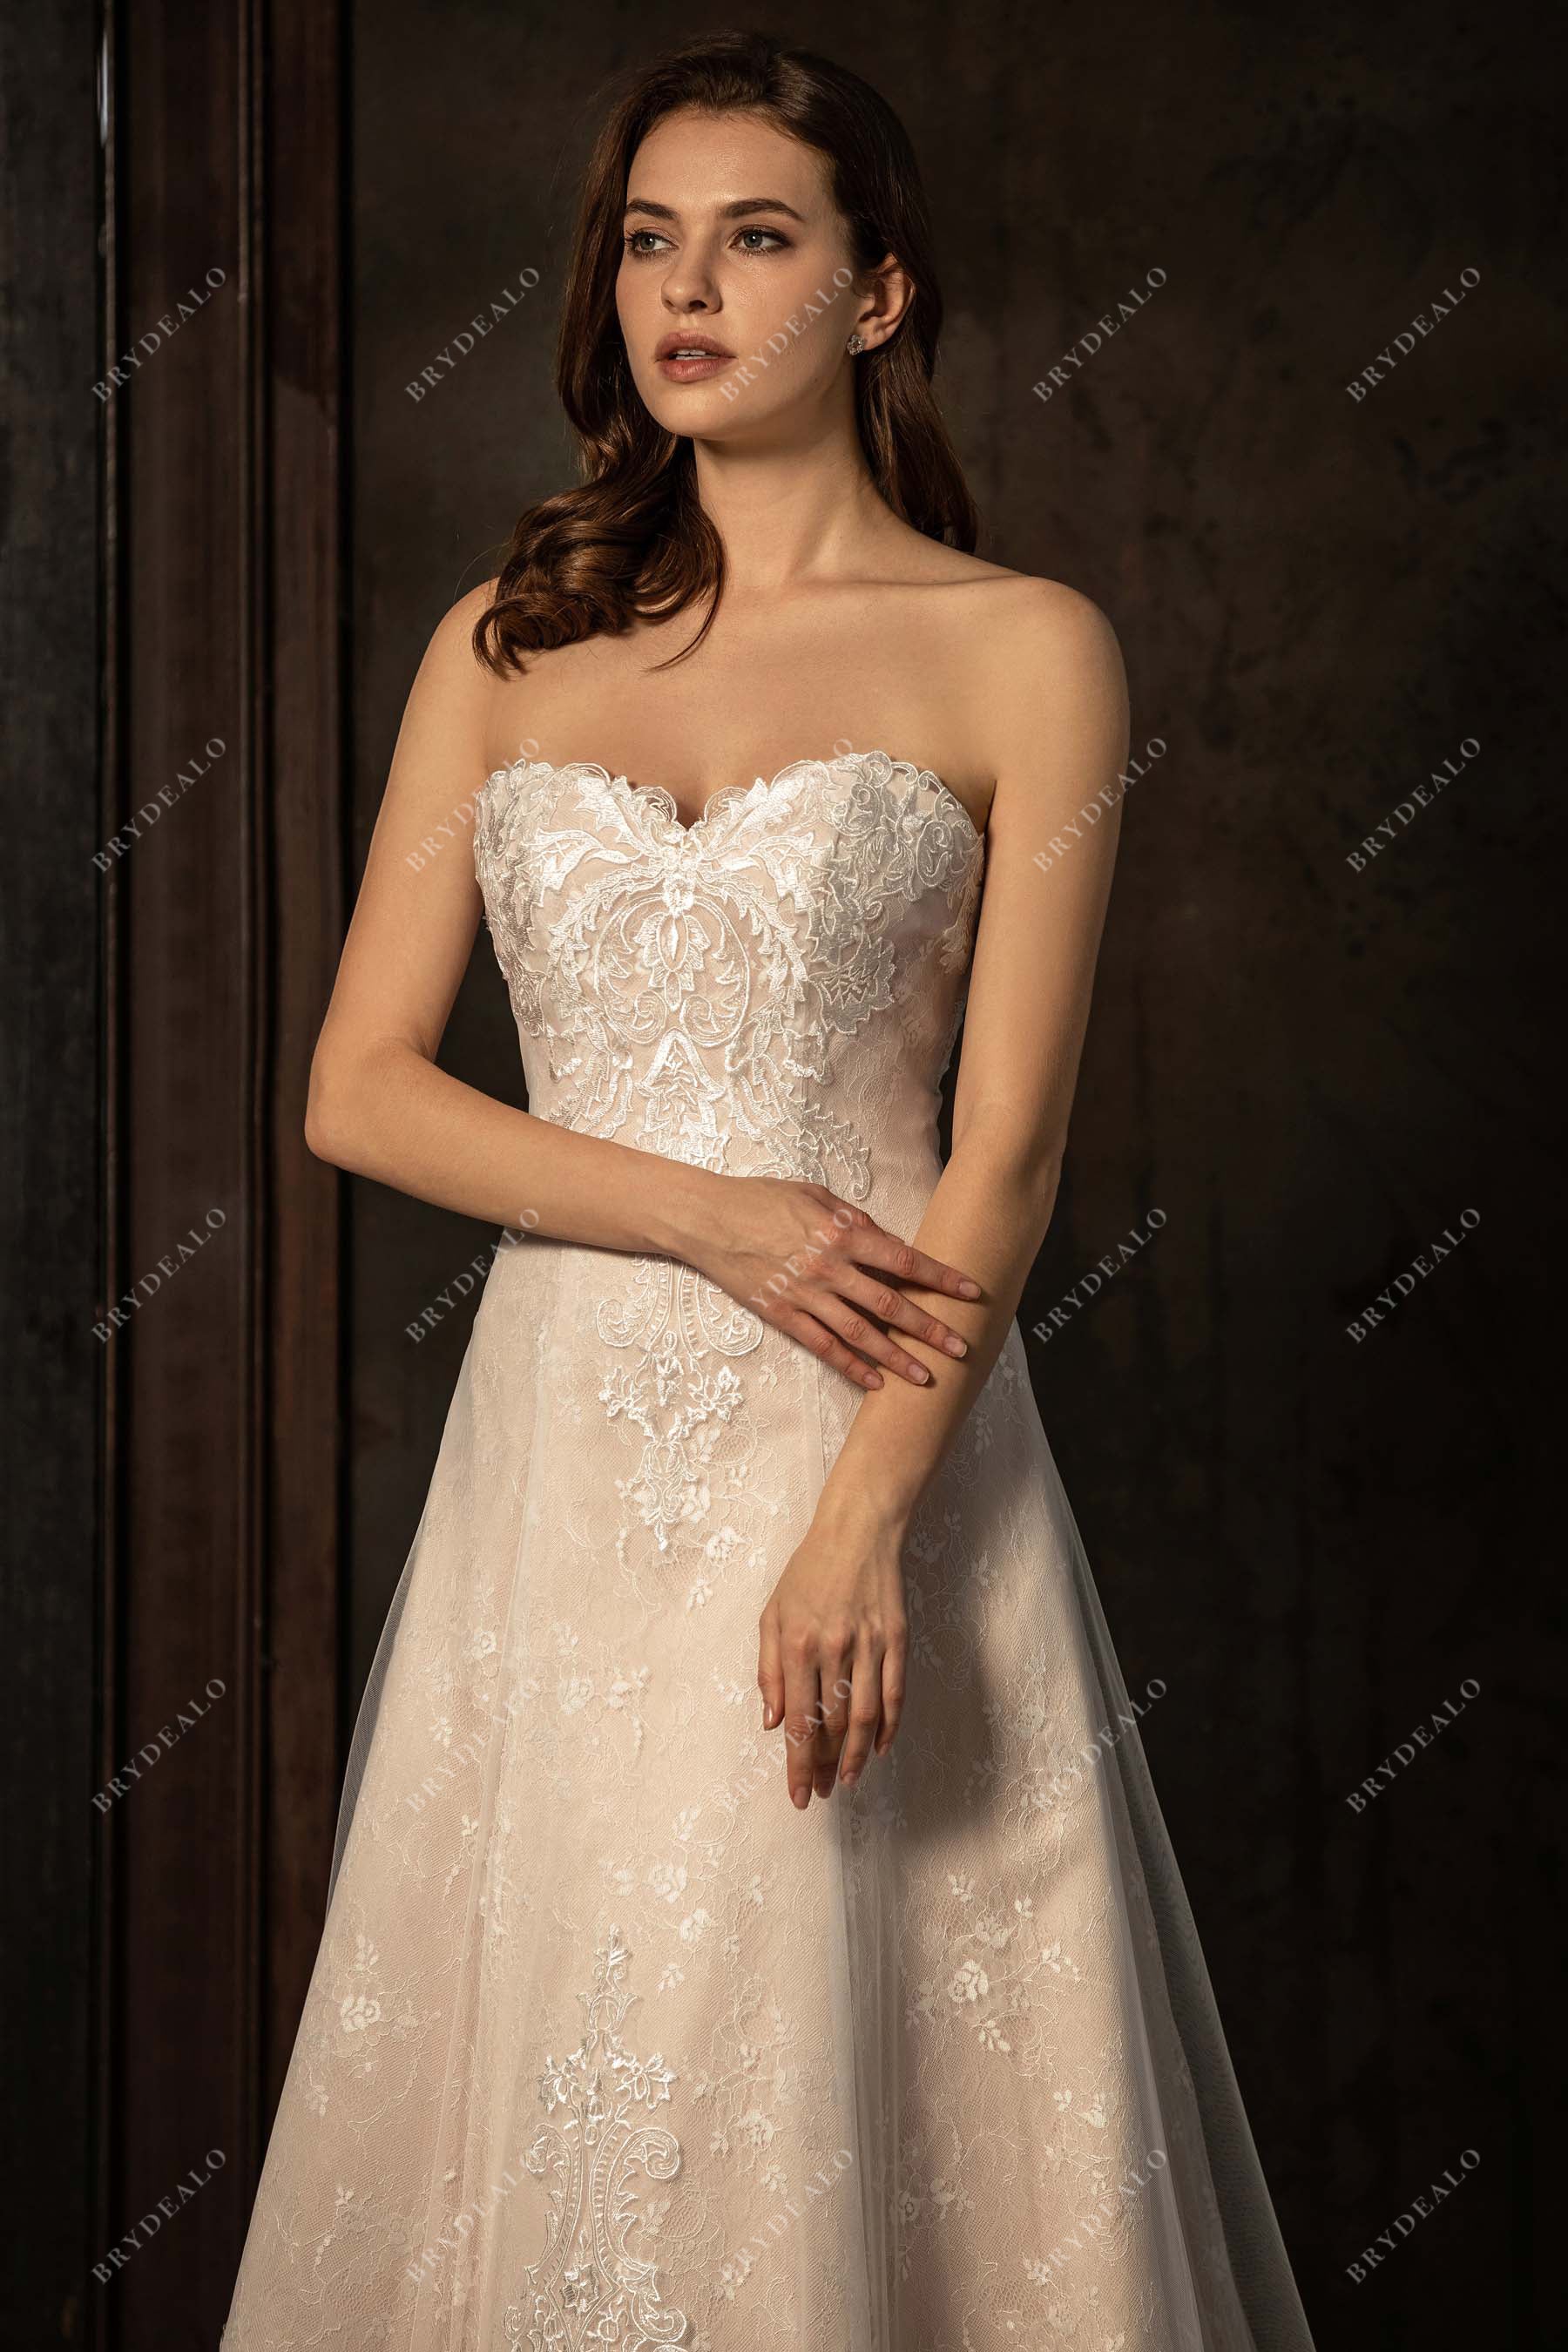 sweetheart neck strapless lace bridal dress